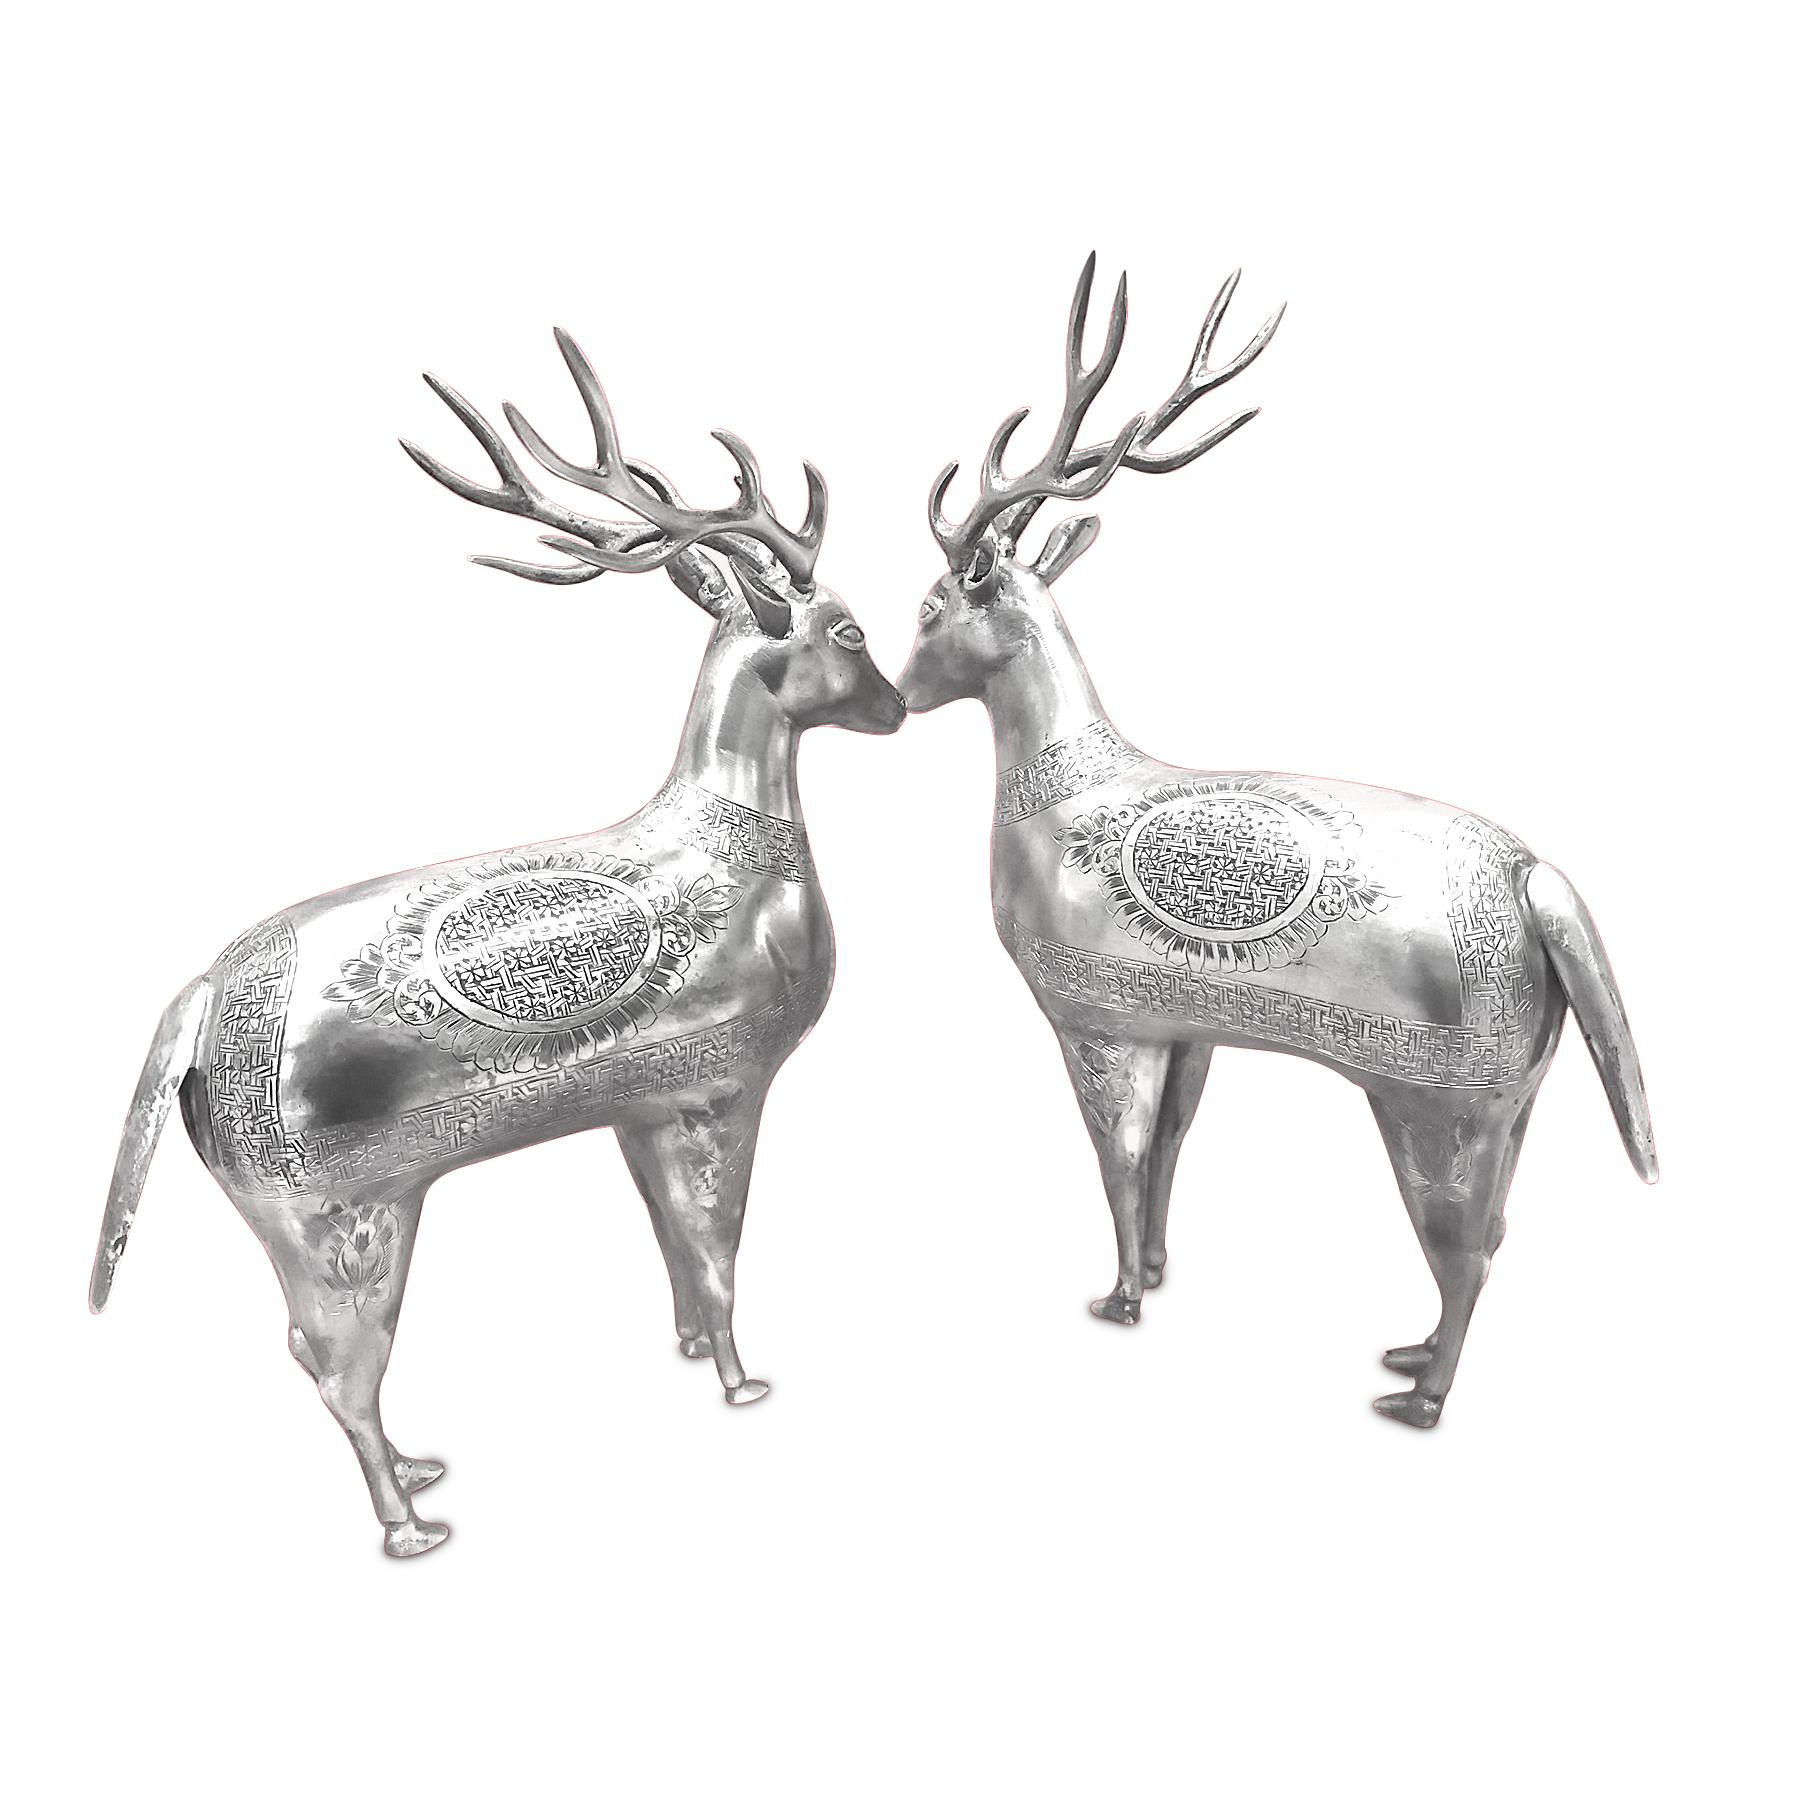 Antique Deer Figurine Silver 1190 Grams In Good Condition For Sale In Jackson Heights, NY